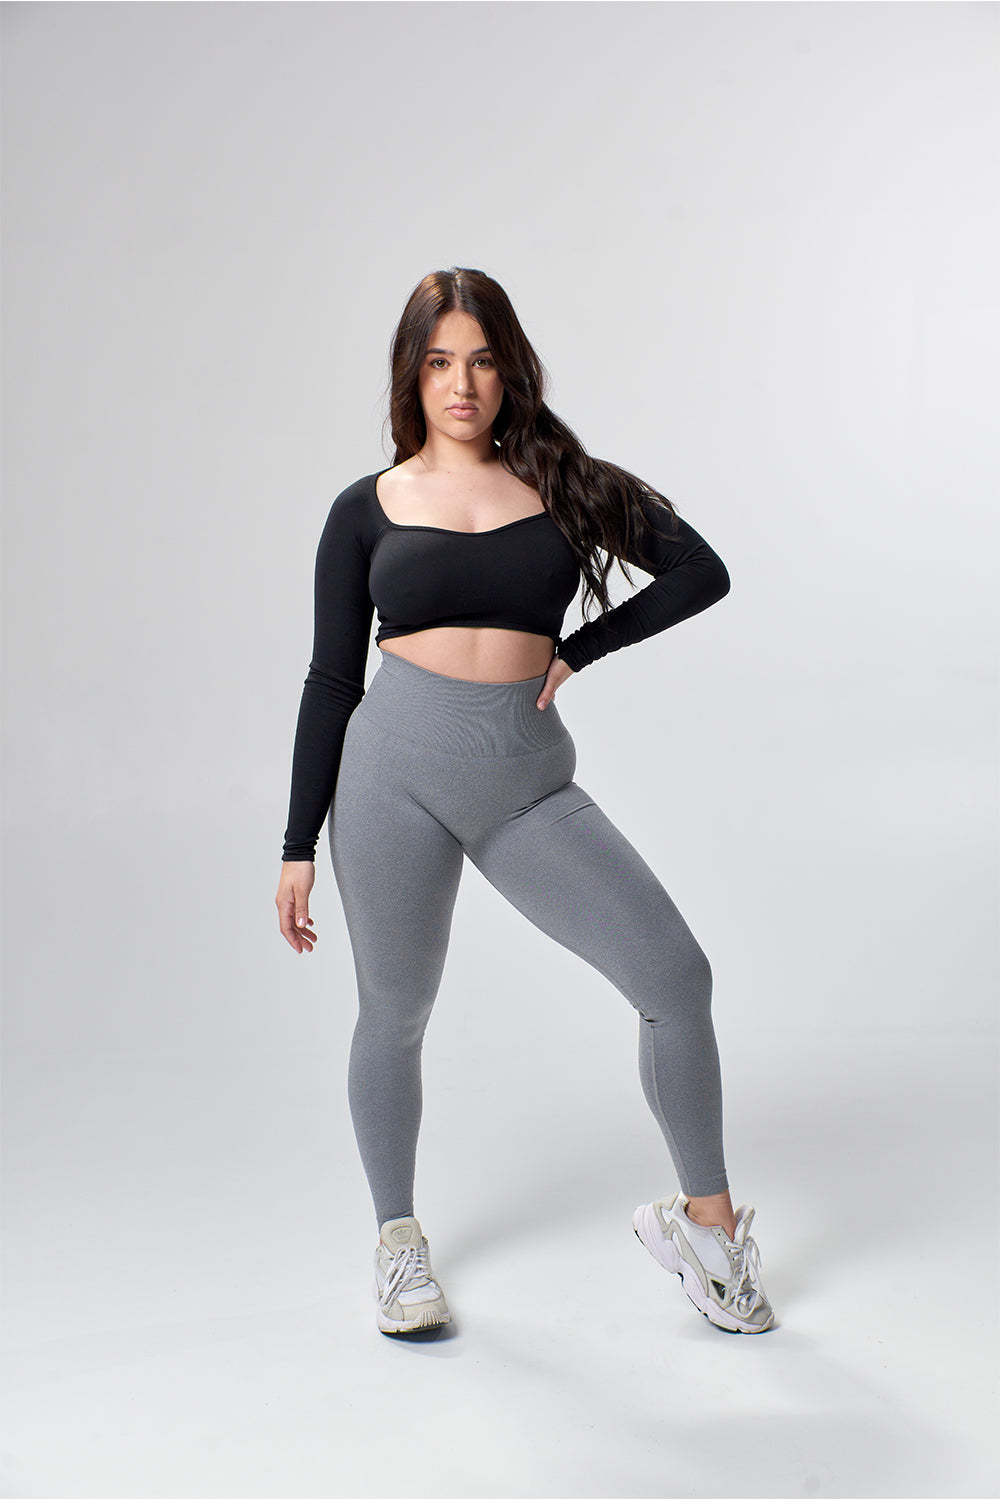 Active Seamless Leggings For Women Slim Fit, Gradient Gym Legging, Perfect  For Formal Daily Parties And Tennis Balls For Walkers From Armelia, $20.51